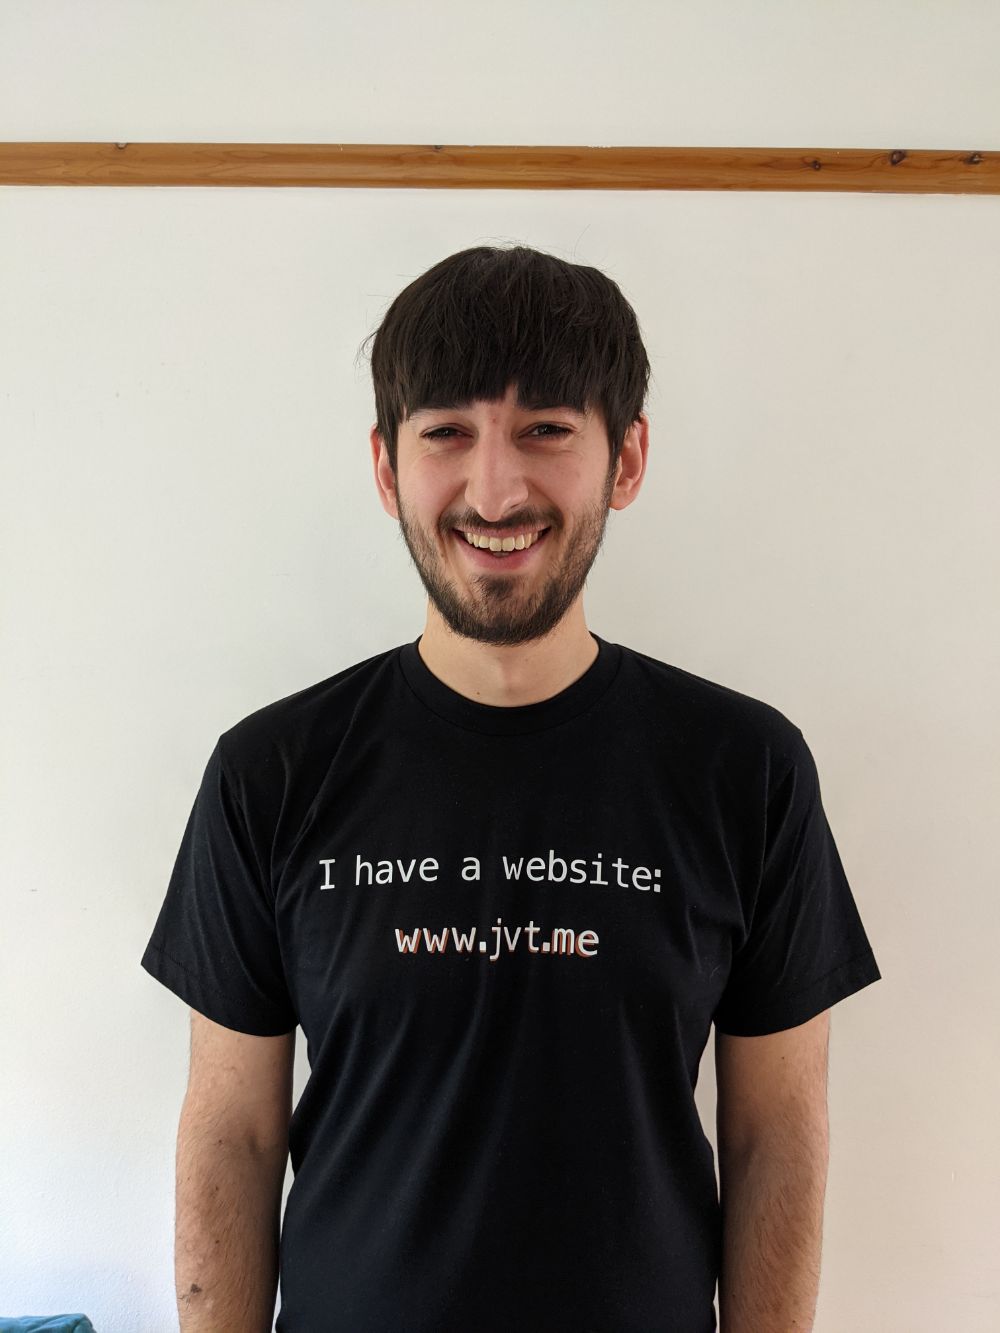 Jamie facing towards the camera, smiling, with "I have a website: www.jvt.me" written on it